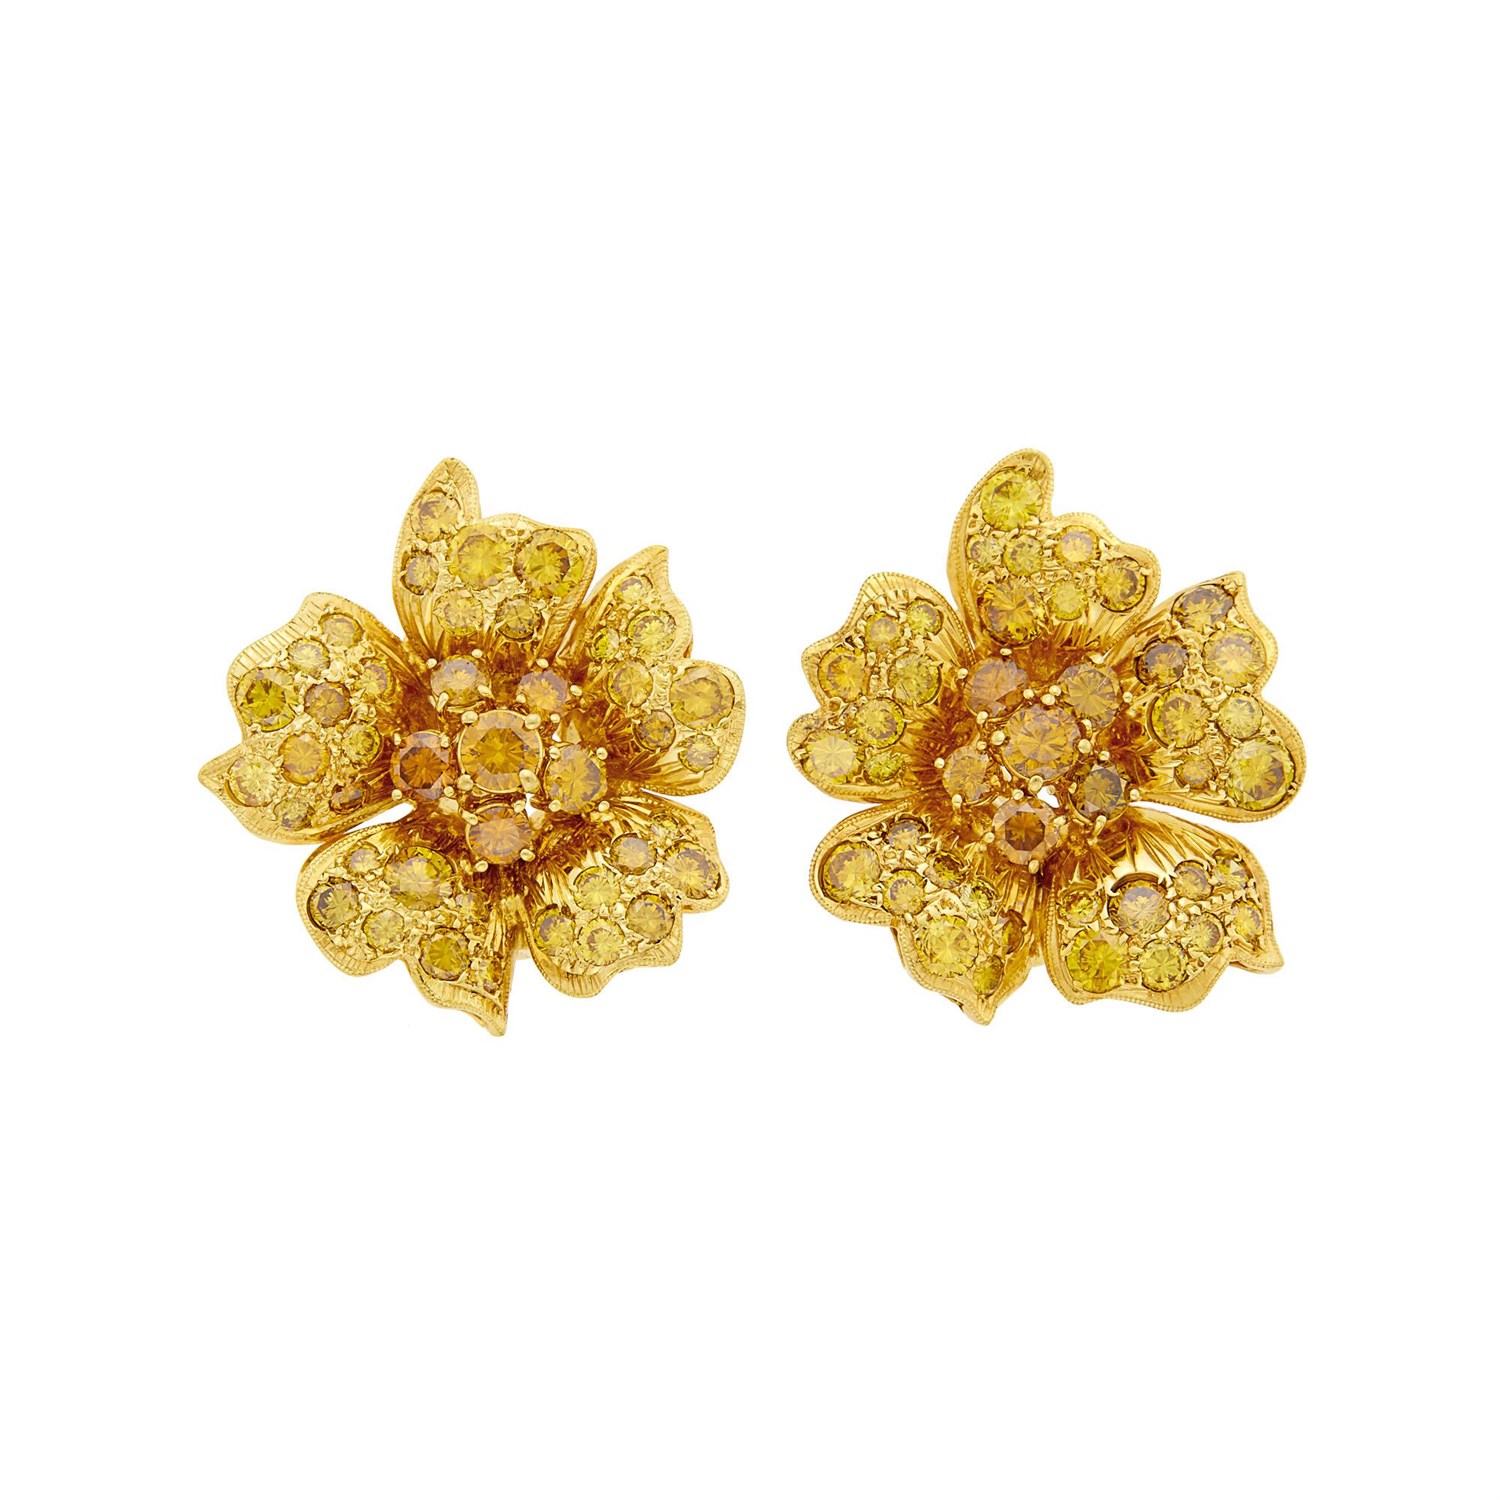 Lot 162 - Pair of Gold and Colored Diamond Flower Earclips